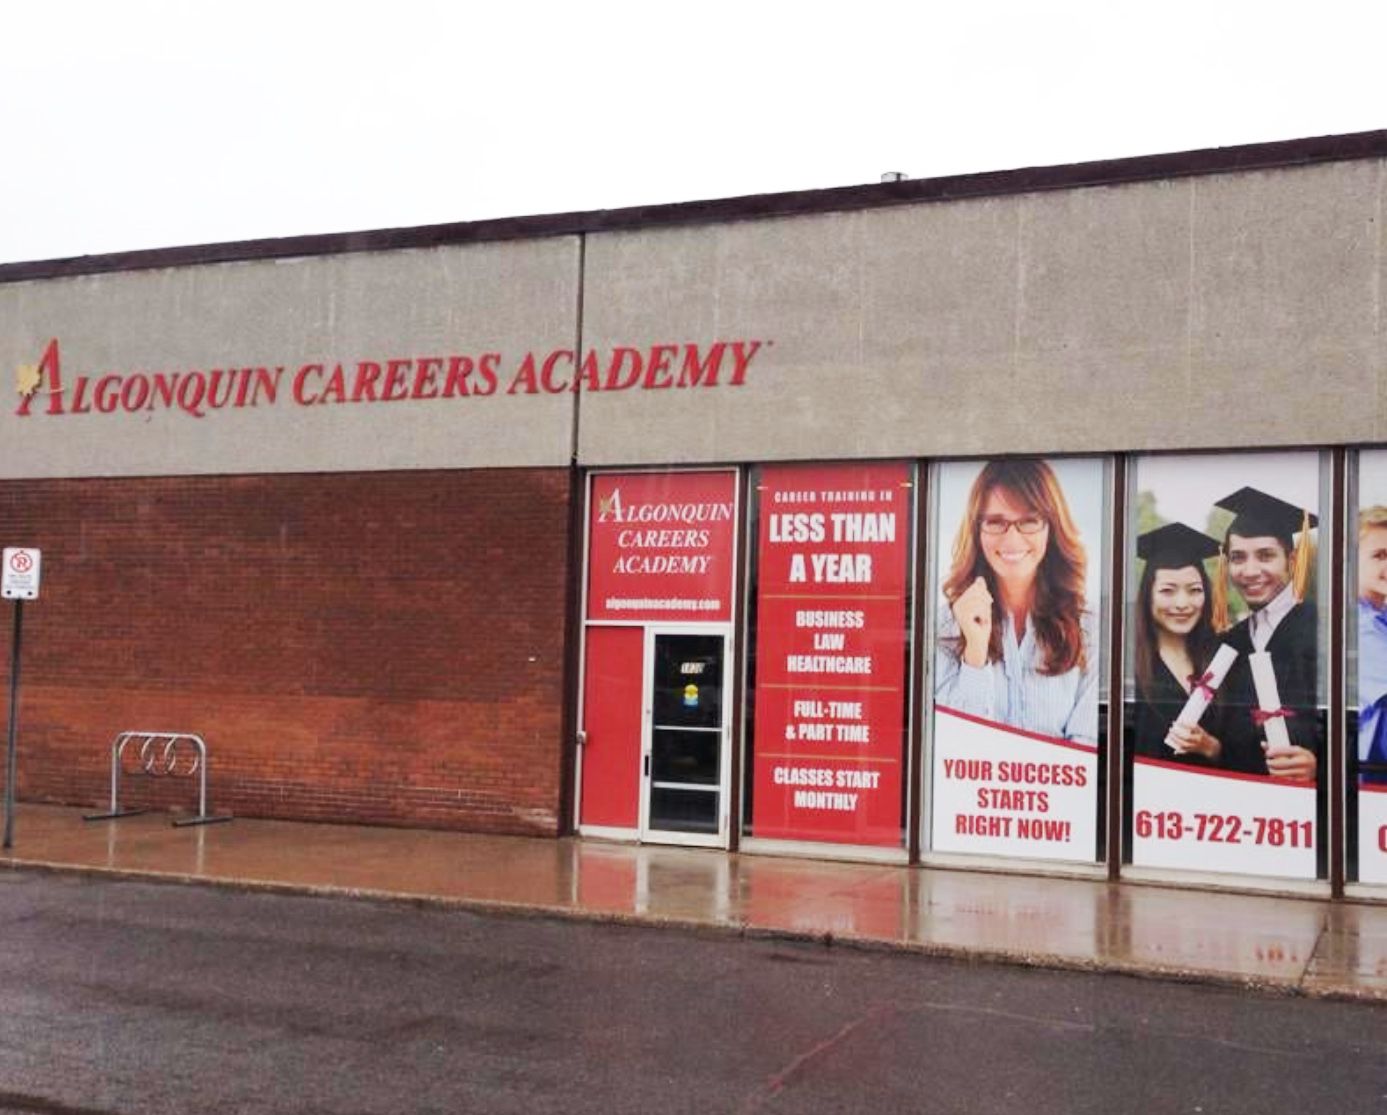 Algonquin Careers Academy rolls out digital 2020 curriculum for paralegals